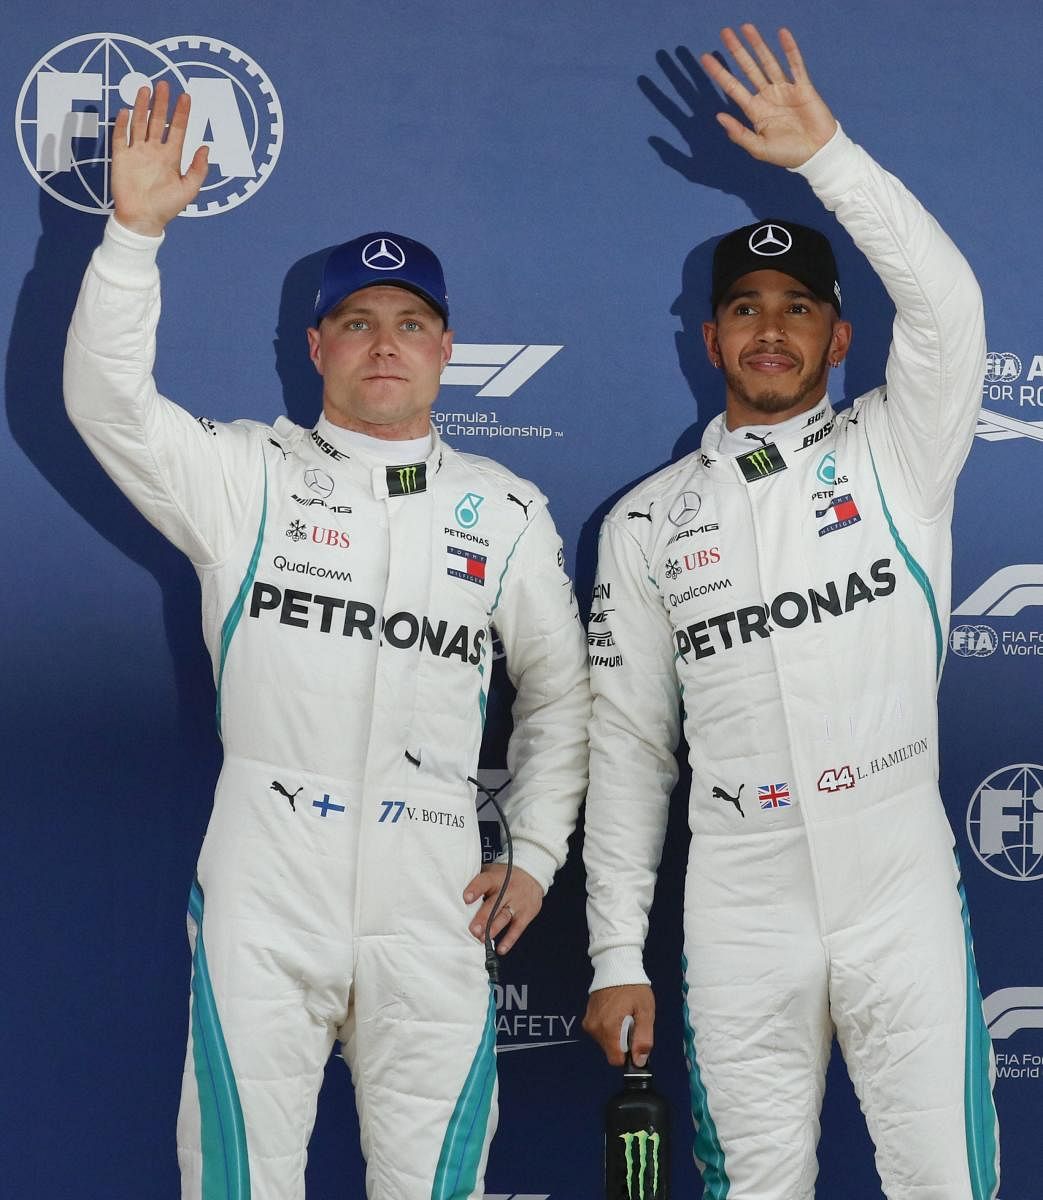 RIGHT START: Mercedes' Lewis Hamilton and team-mate Valtteri Bottas acknowledges the crowd after the qualifying session at the Barcelona Catalunya circuit in Spain on Saturday. AP/PTI